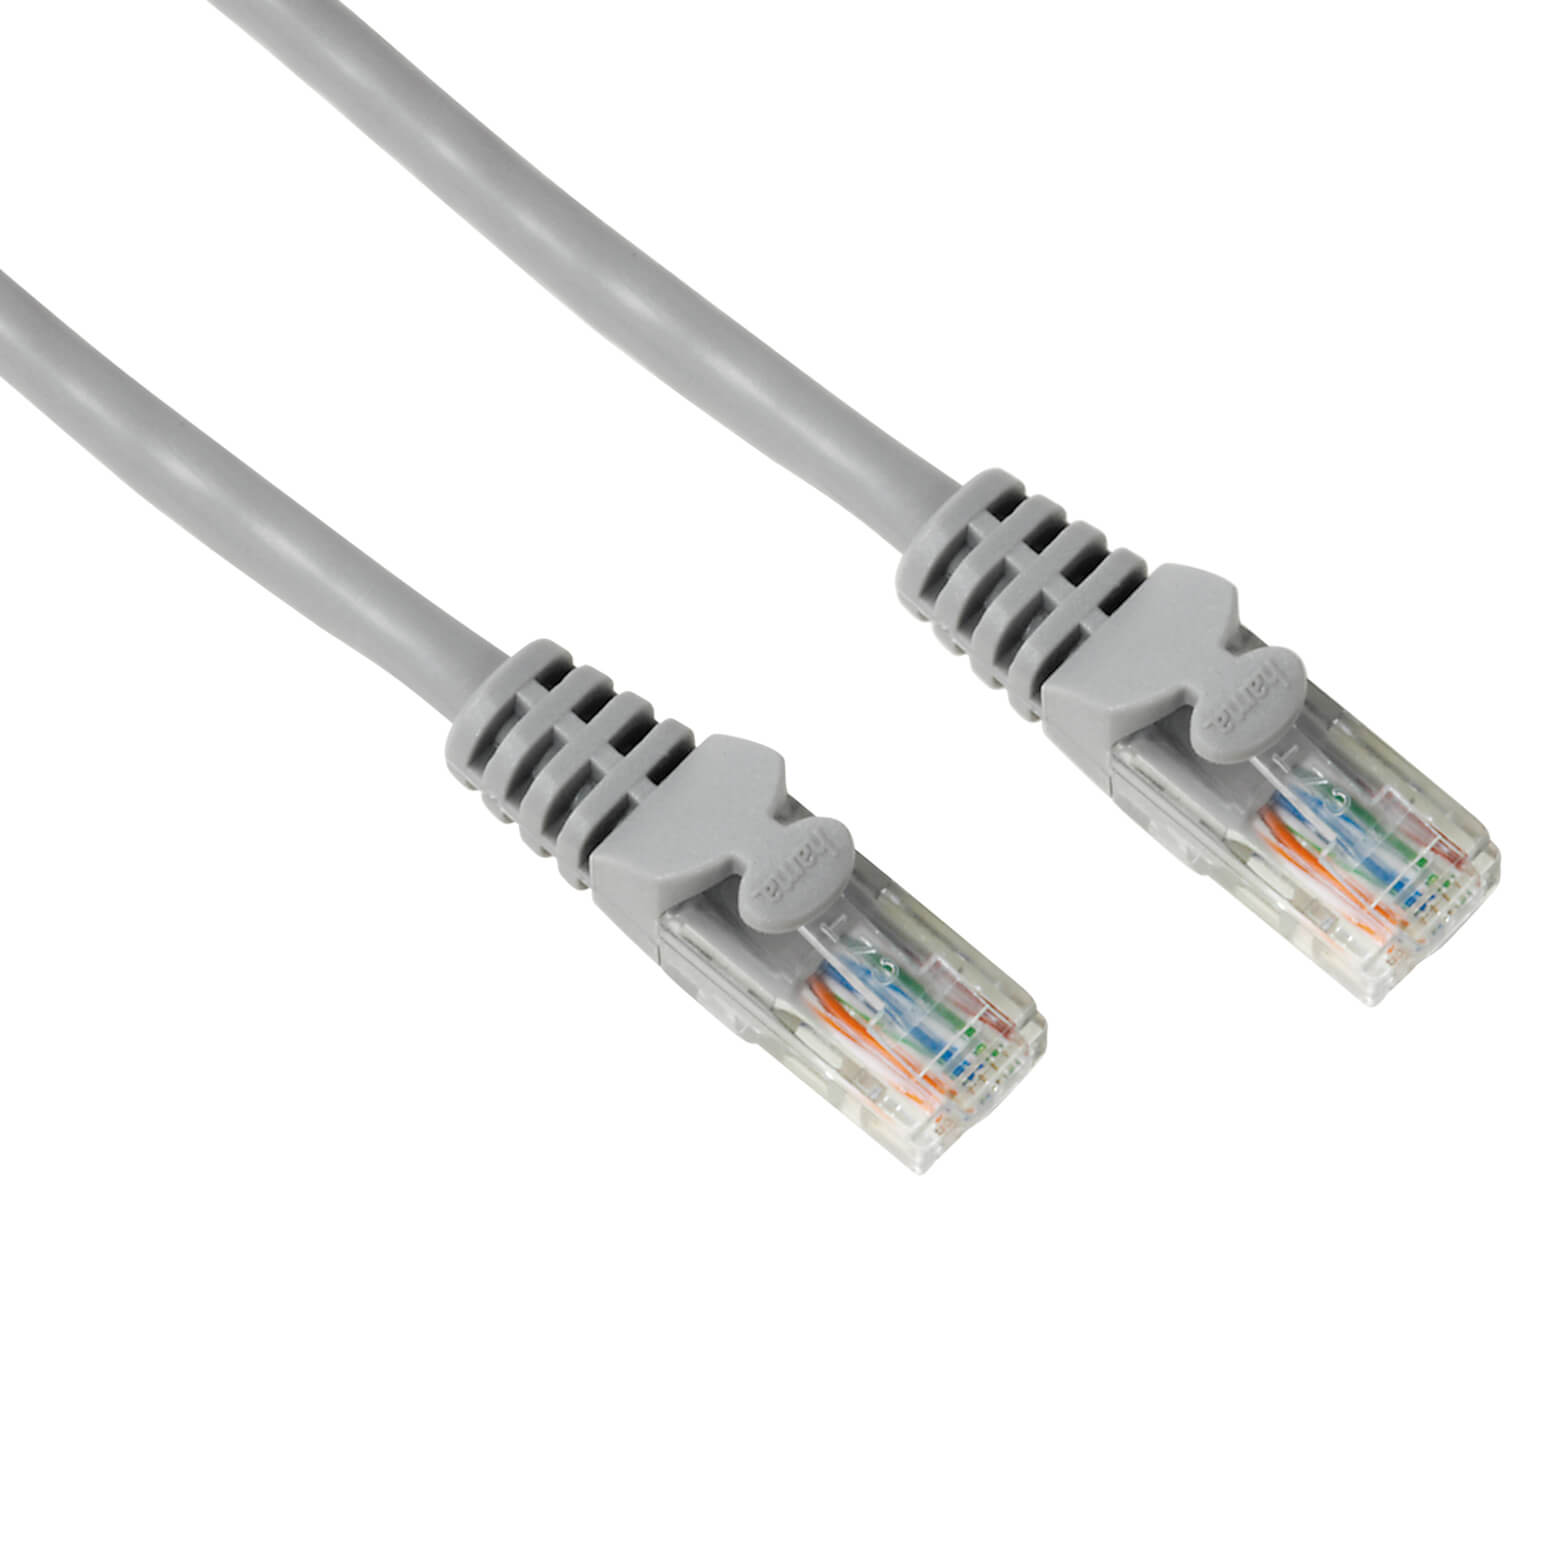 CAT 5e Network Cable UTP, gre y, 5.00 m